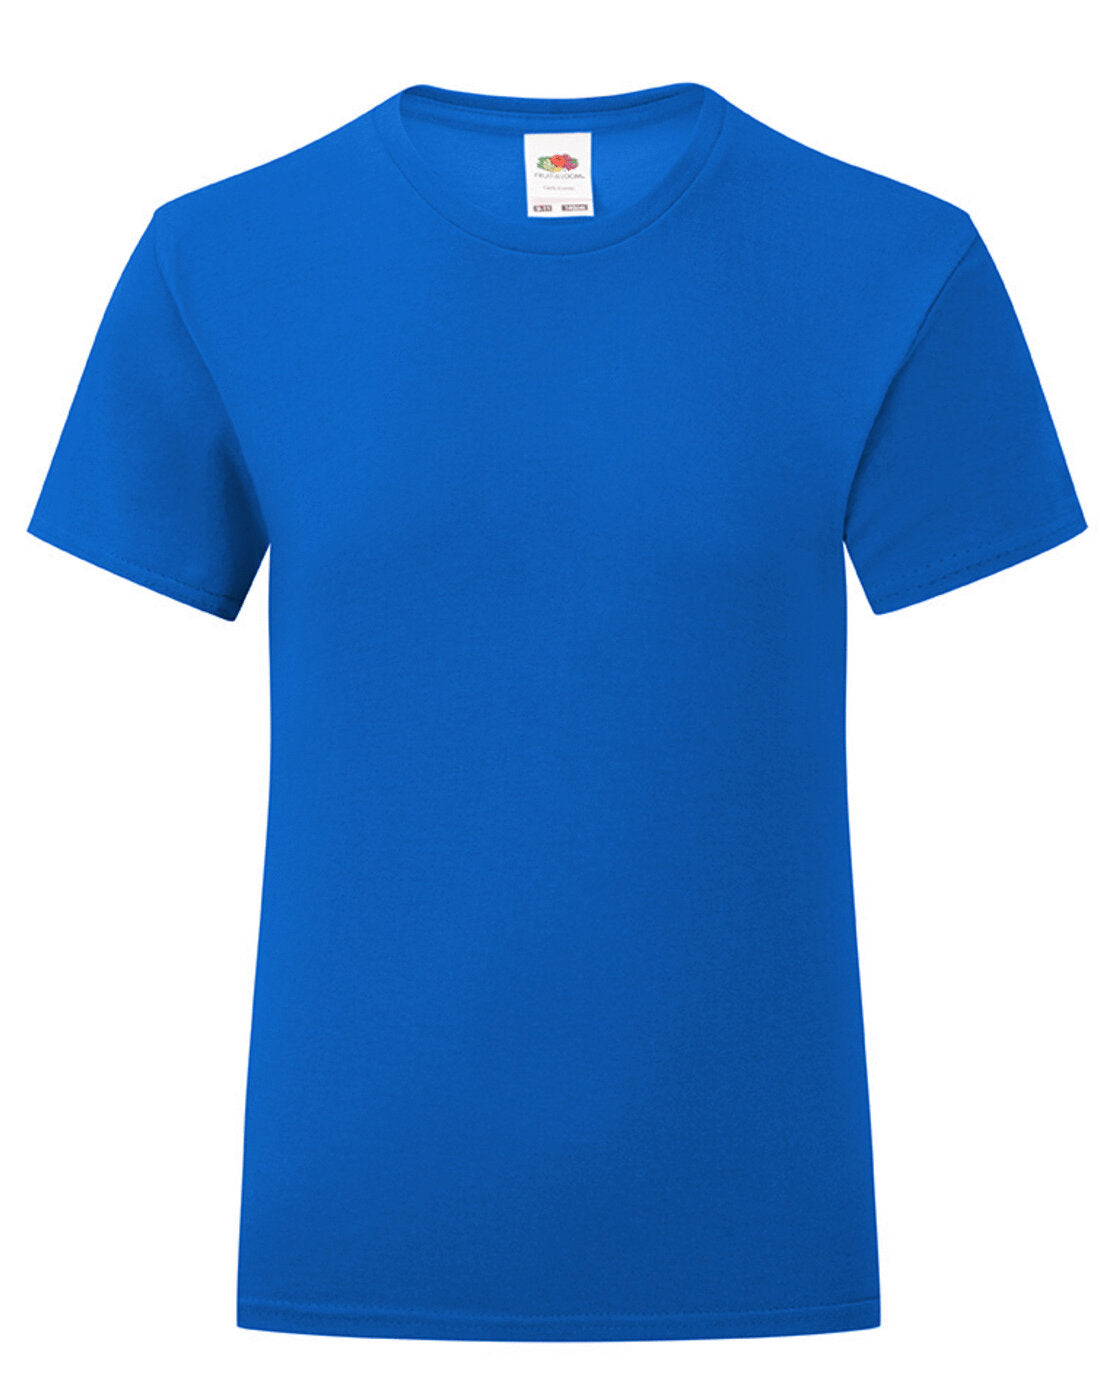 Fruit of the Loom Girls Iconic T - Royal Blue